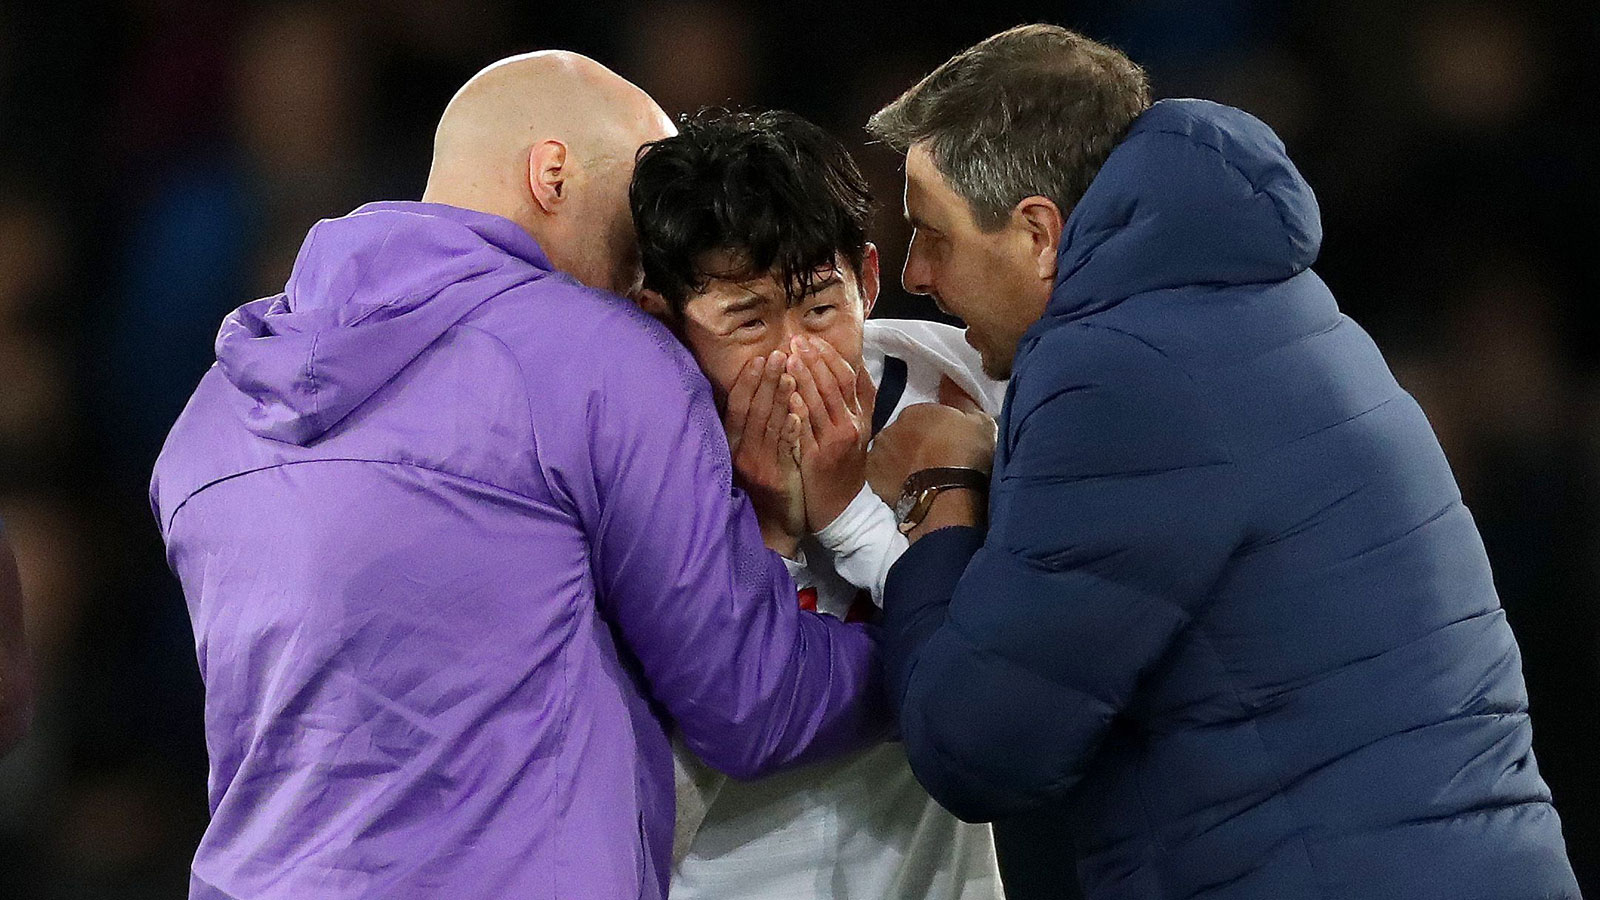 Son Heung-min cries after injuring Andre Gomes